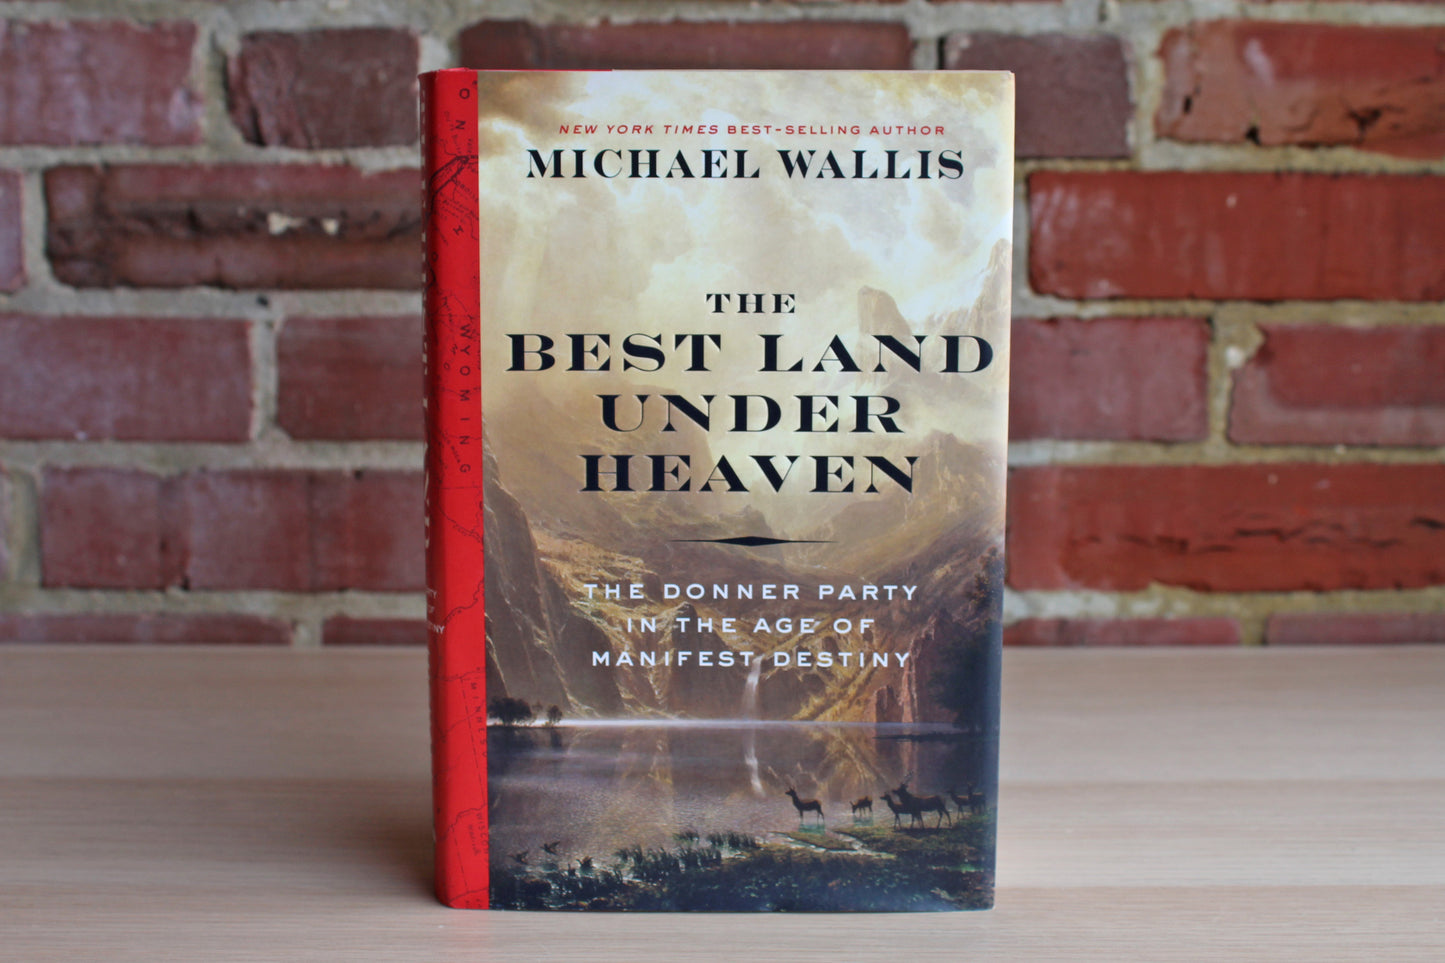 The Best Land Under Heaven:  The Donner Party in the Age of Manifest Destiny by Michael Wallis